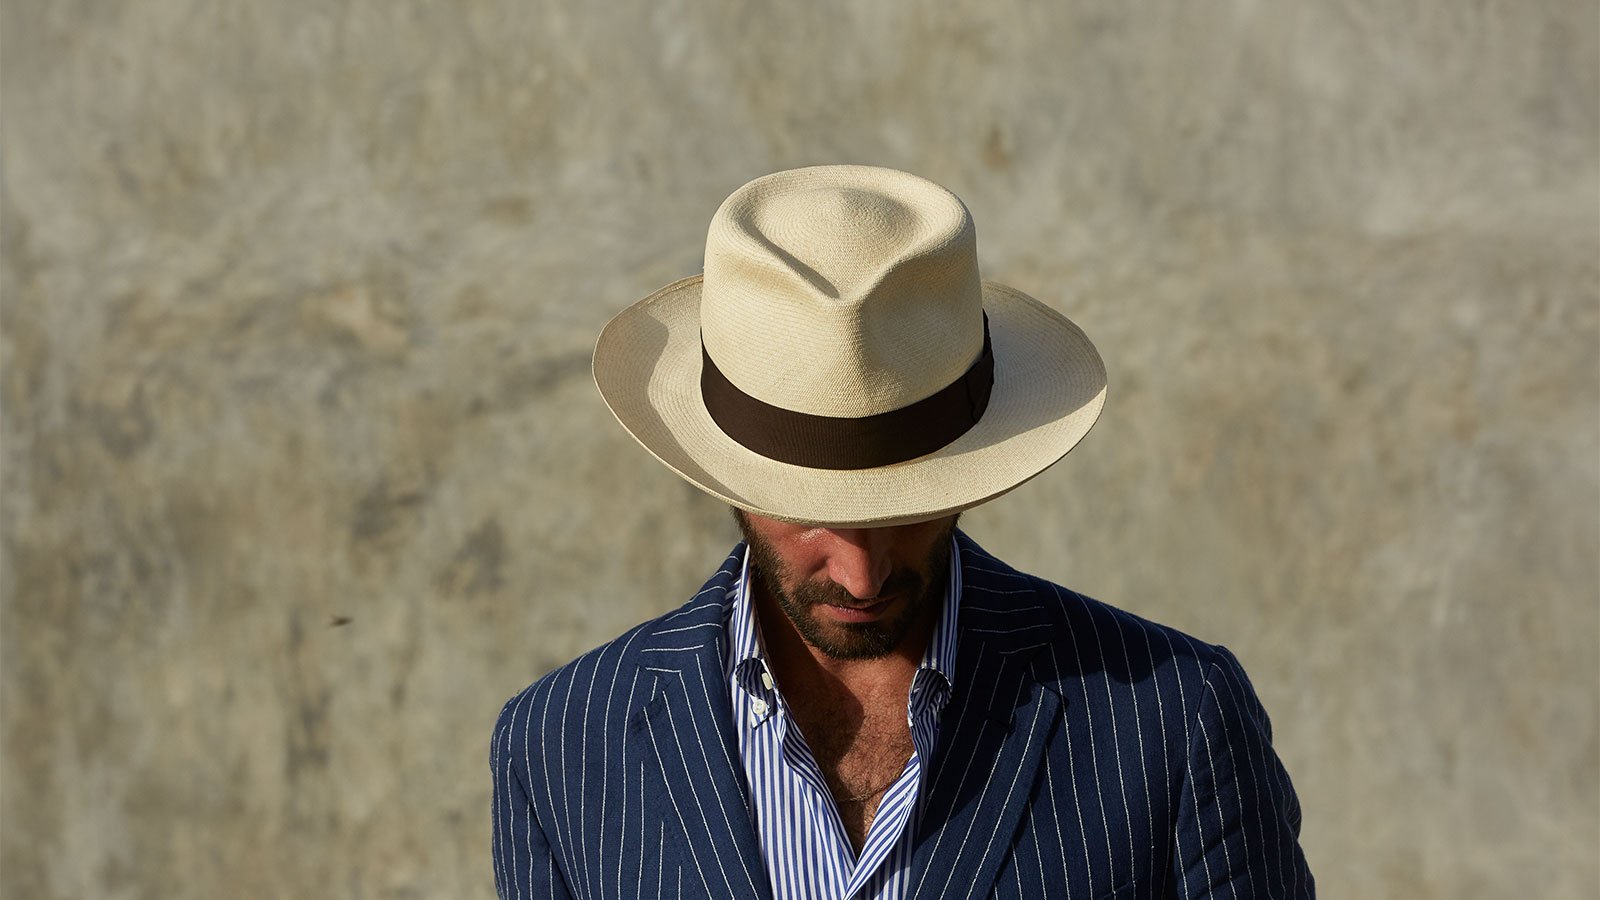 Design
Rarer than a perfect diamond and infinitely more refined, we are proud to carry the most exquisitely crafted Montecristi Panama hats in the world. Depending on the quality of the weave, a Worth & Worth Montecristi Panama Hat can take several months to weave by our master weavers in Ecuador. Available in four different qualities, the result is a hat with a soft texture, translucent appearance, and luminous ivory color.
Material
This Montecristi Panama straw is handwoven in Ecuador available in 4 different qualities: Artisan, Master, Museum, and Superfino and handcrafted in our NY atelier. 
Specifications
Our Montecristi Barbados Denim combines a 4 teardrop crown and  3” brim. with 100% weathered organic denim cotton Hatband juxtapositioned with a Kick.  Handwoven by our master weavers in Ecuador.Handcrafted in New York. Truly a work of art.